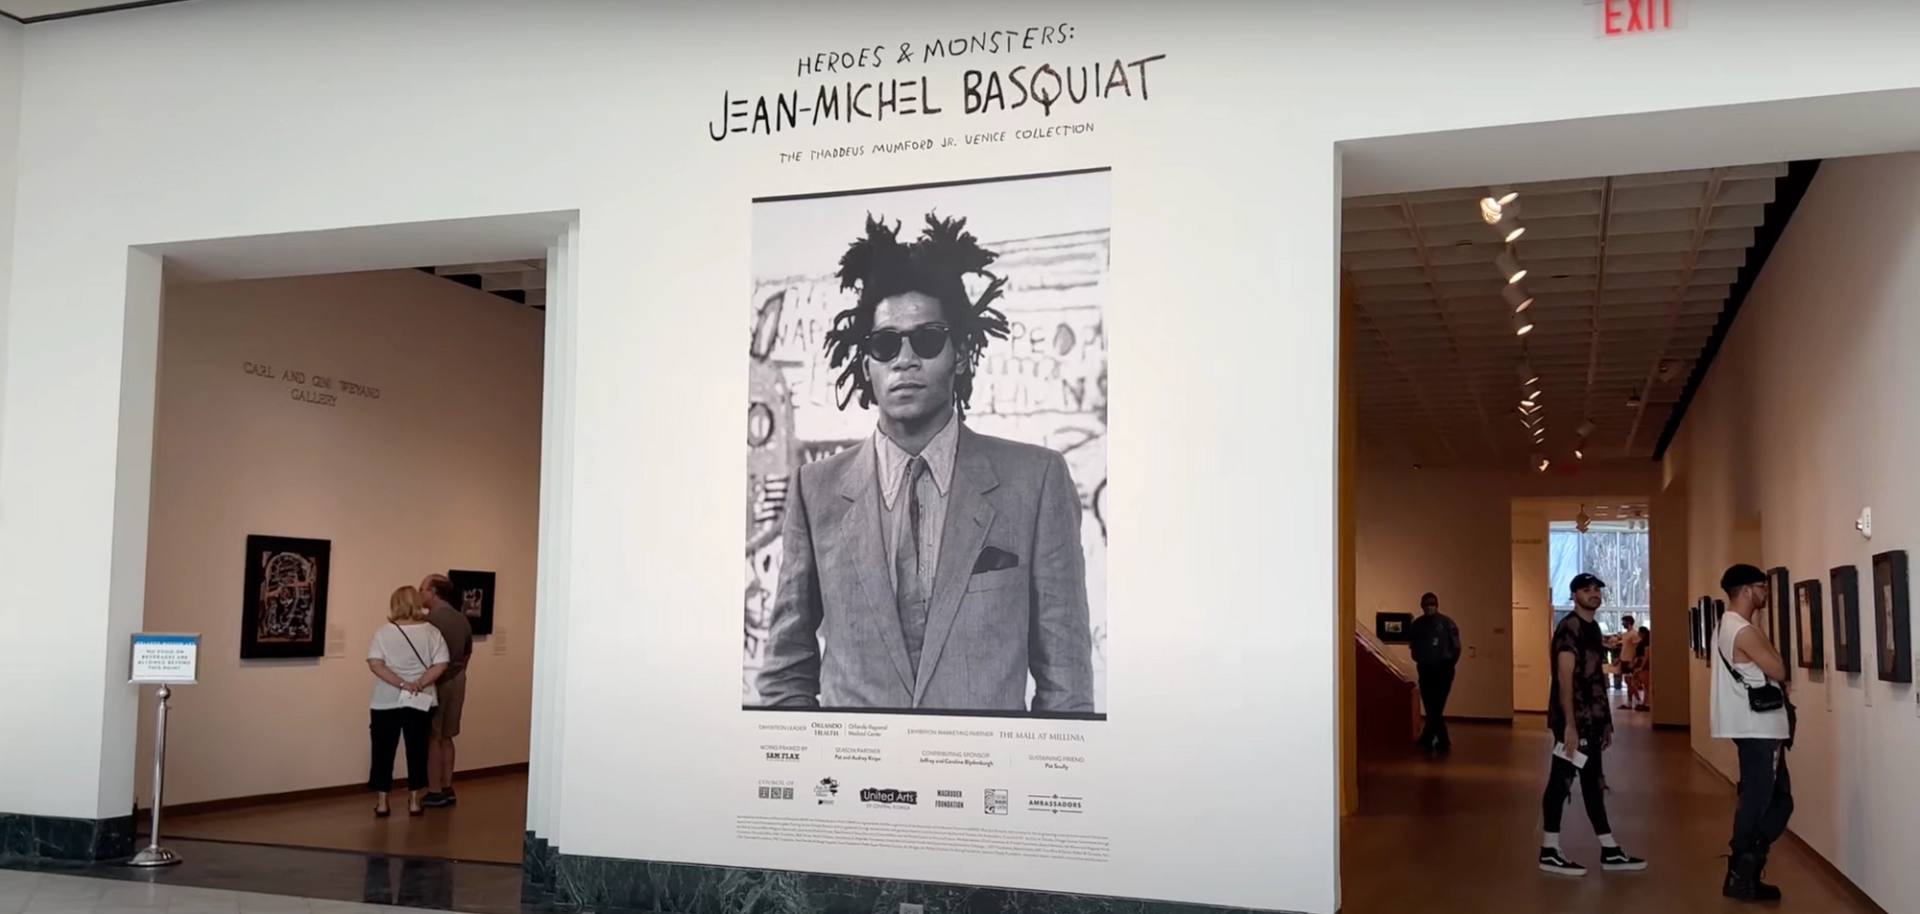 The Jean-Michel Basquiat Forgery Scandal at the Orlando Museum of Art